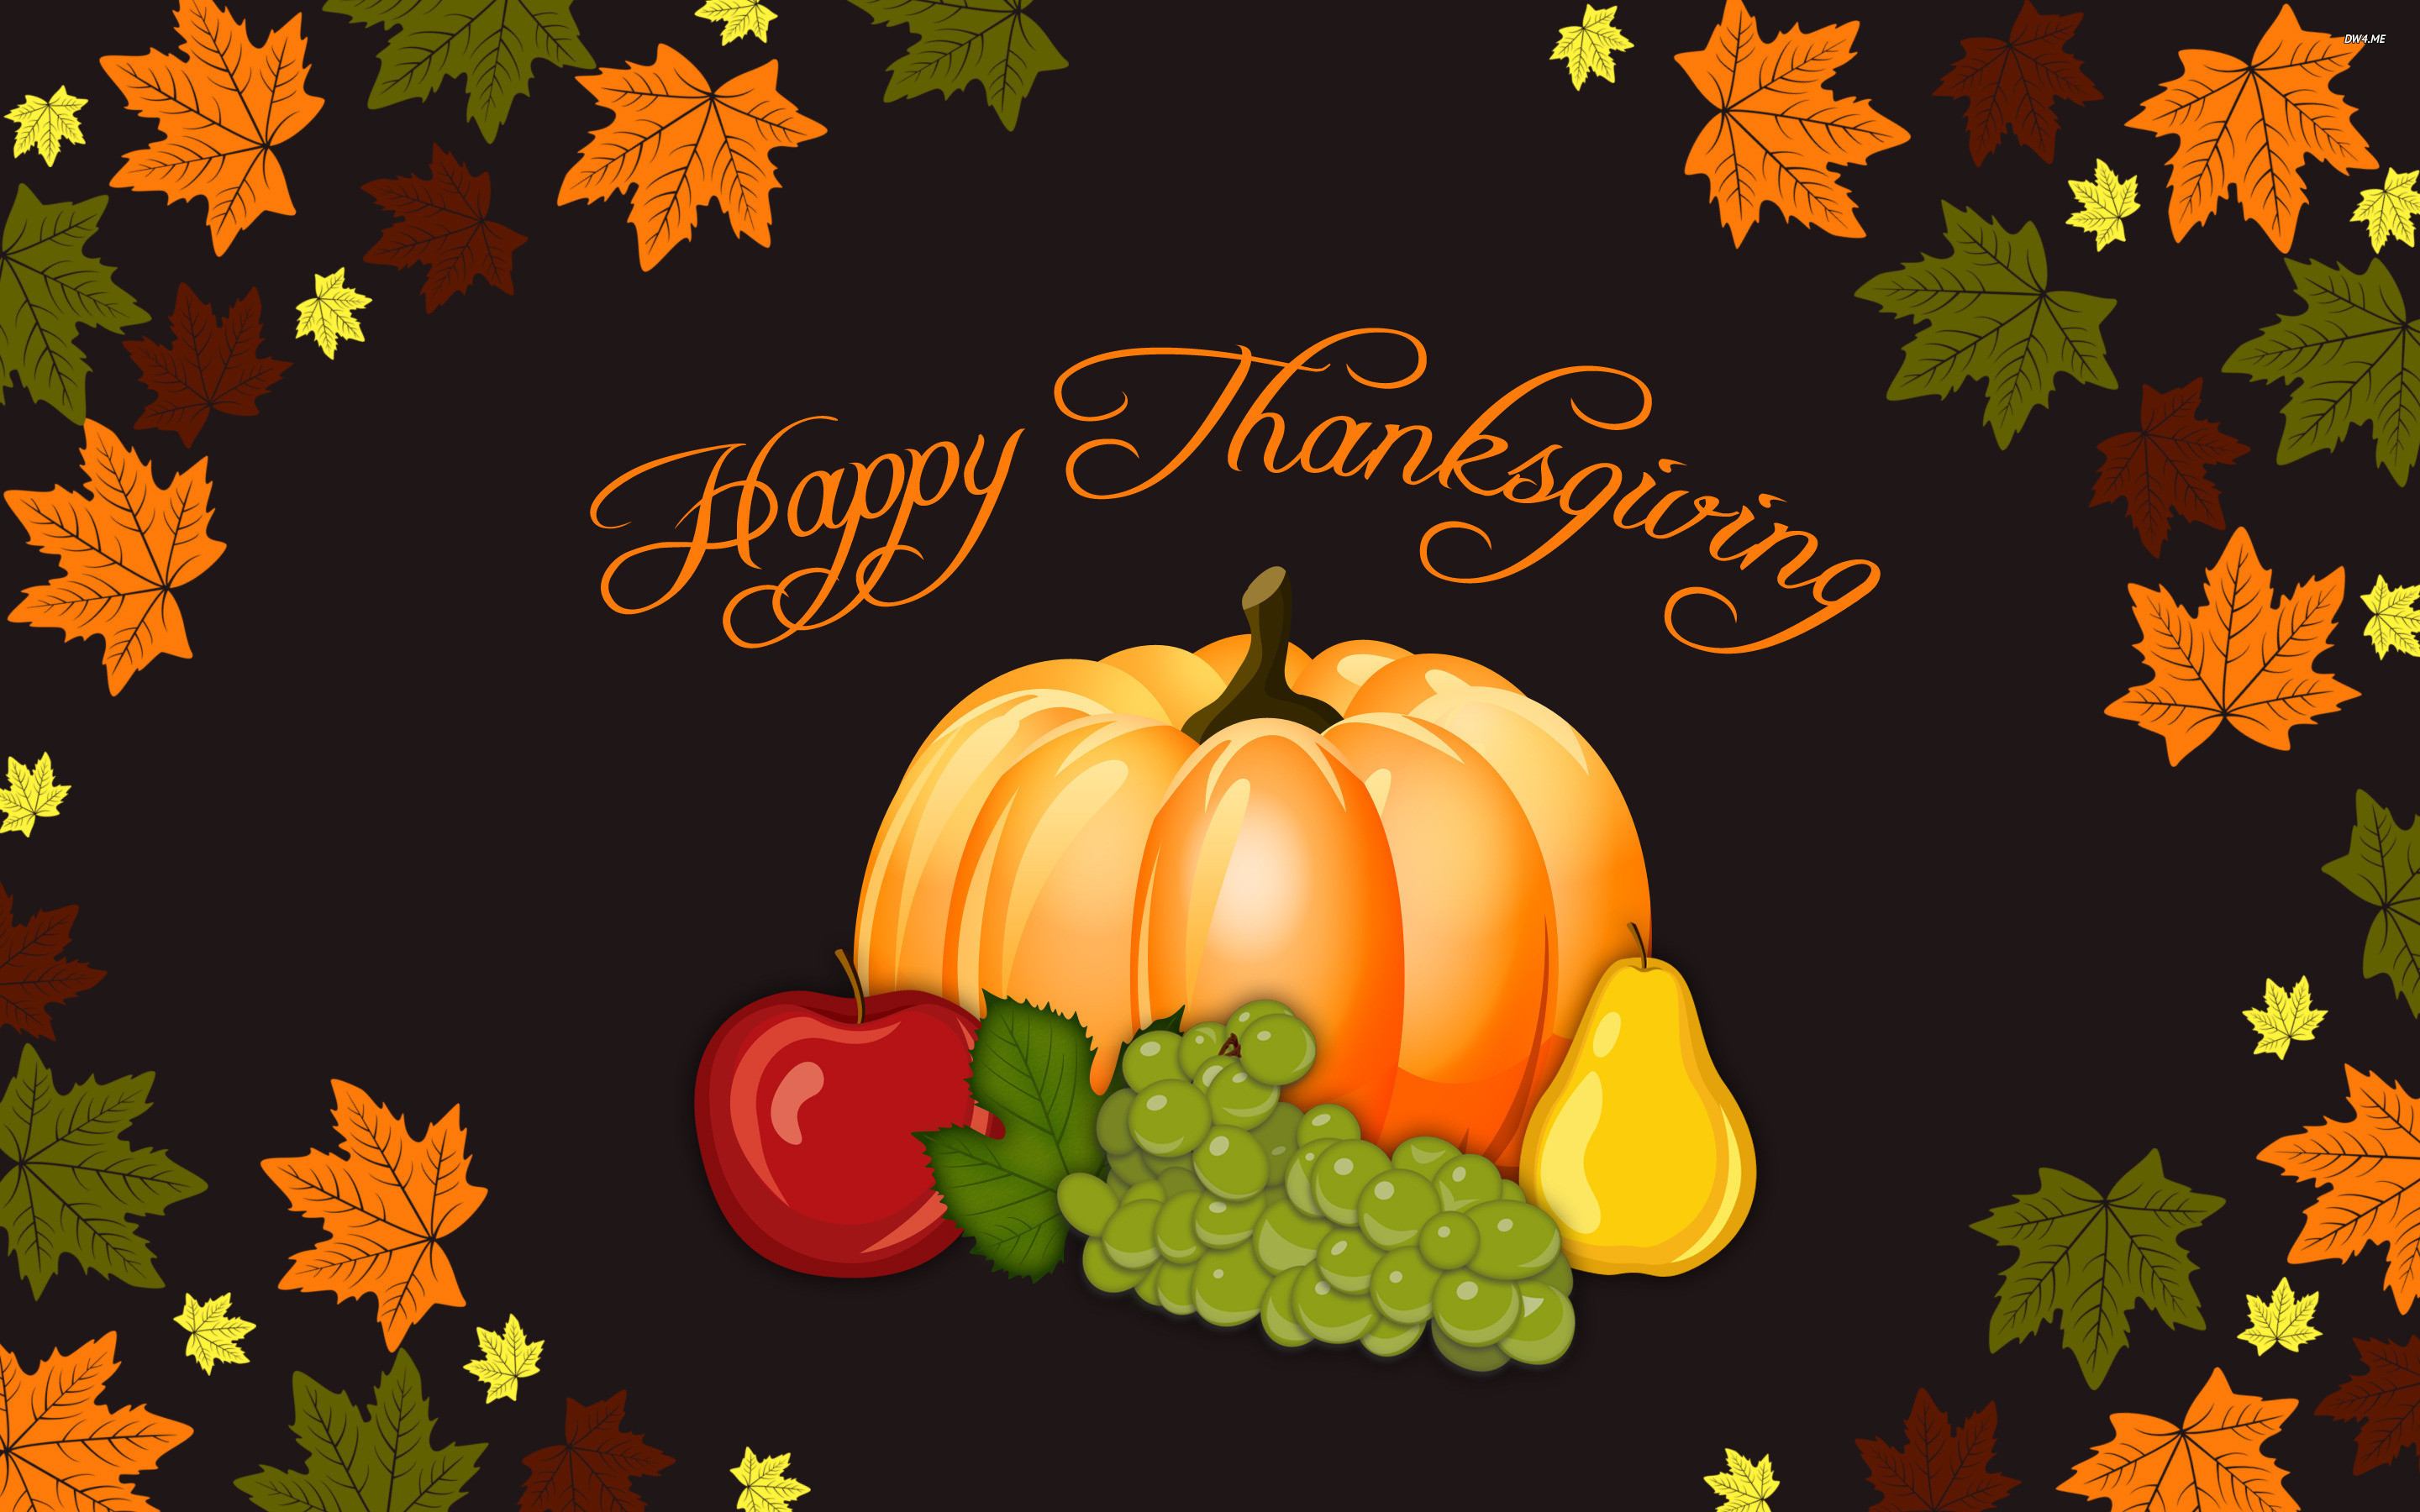 Thanksgiving wallpaper for puter pictures